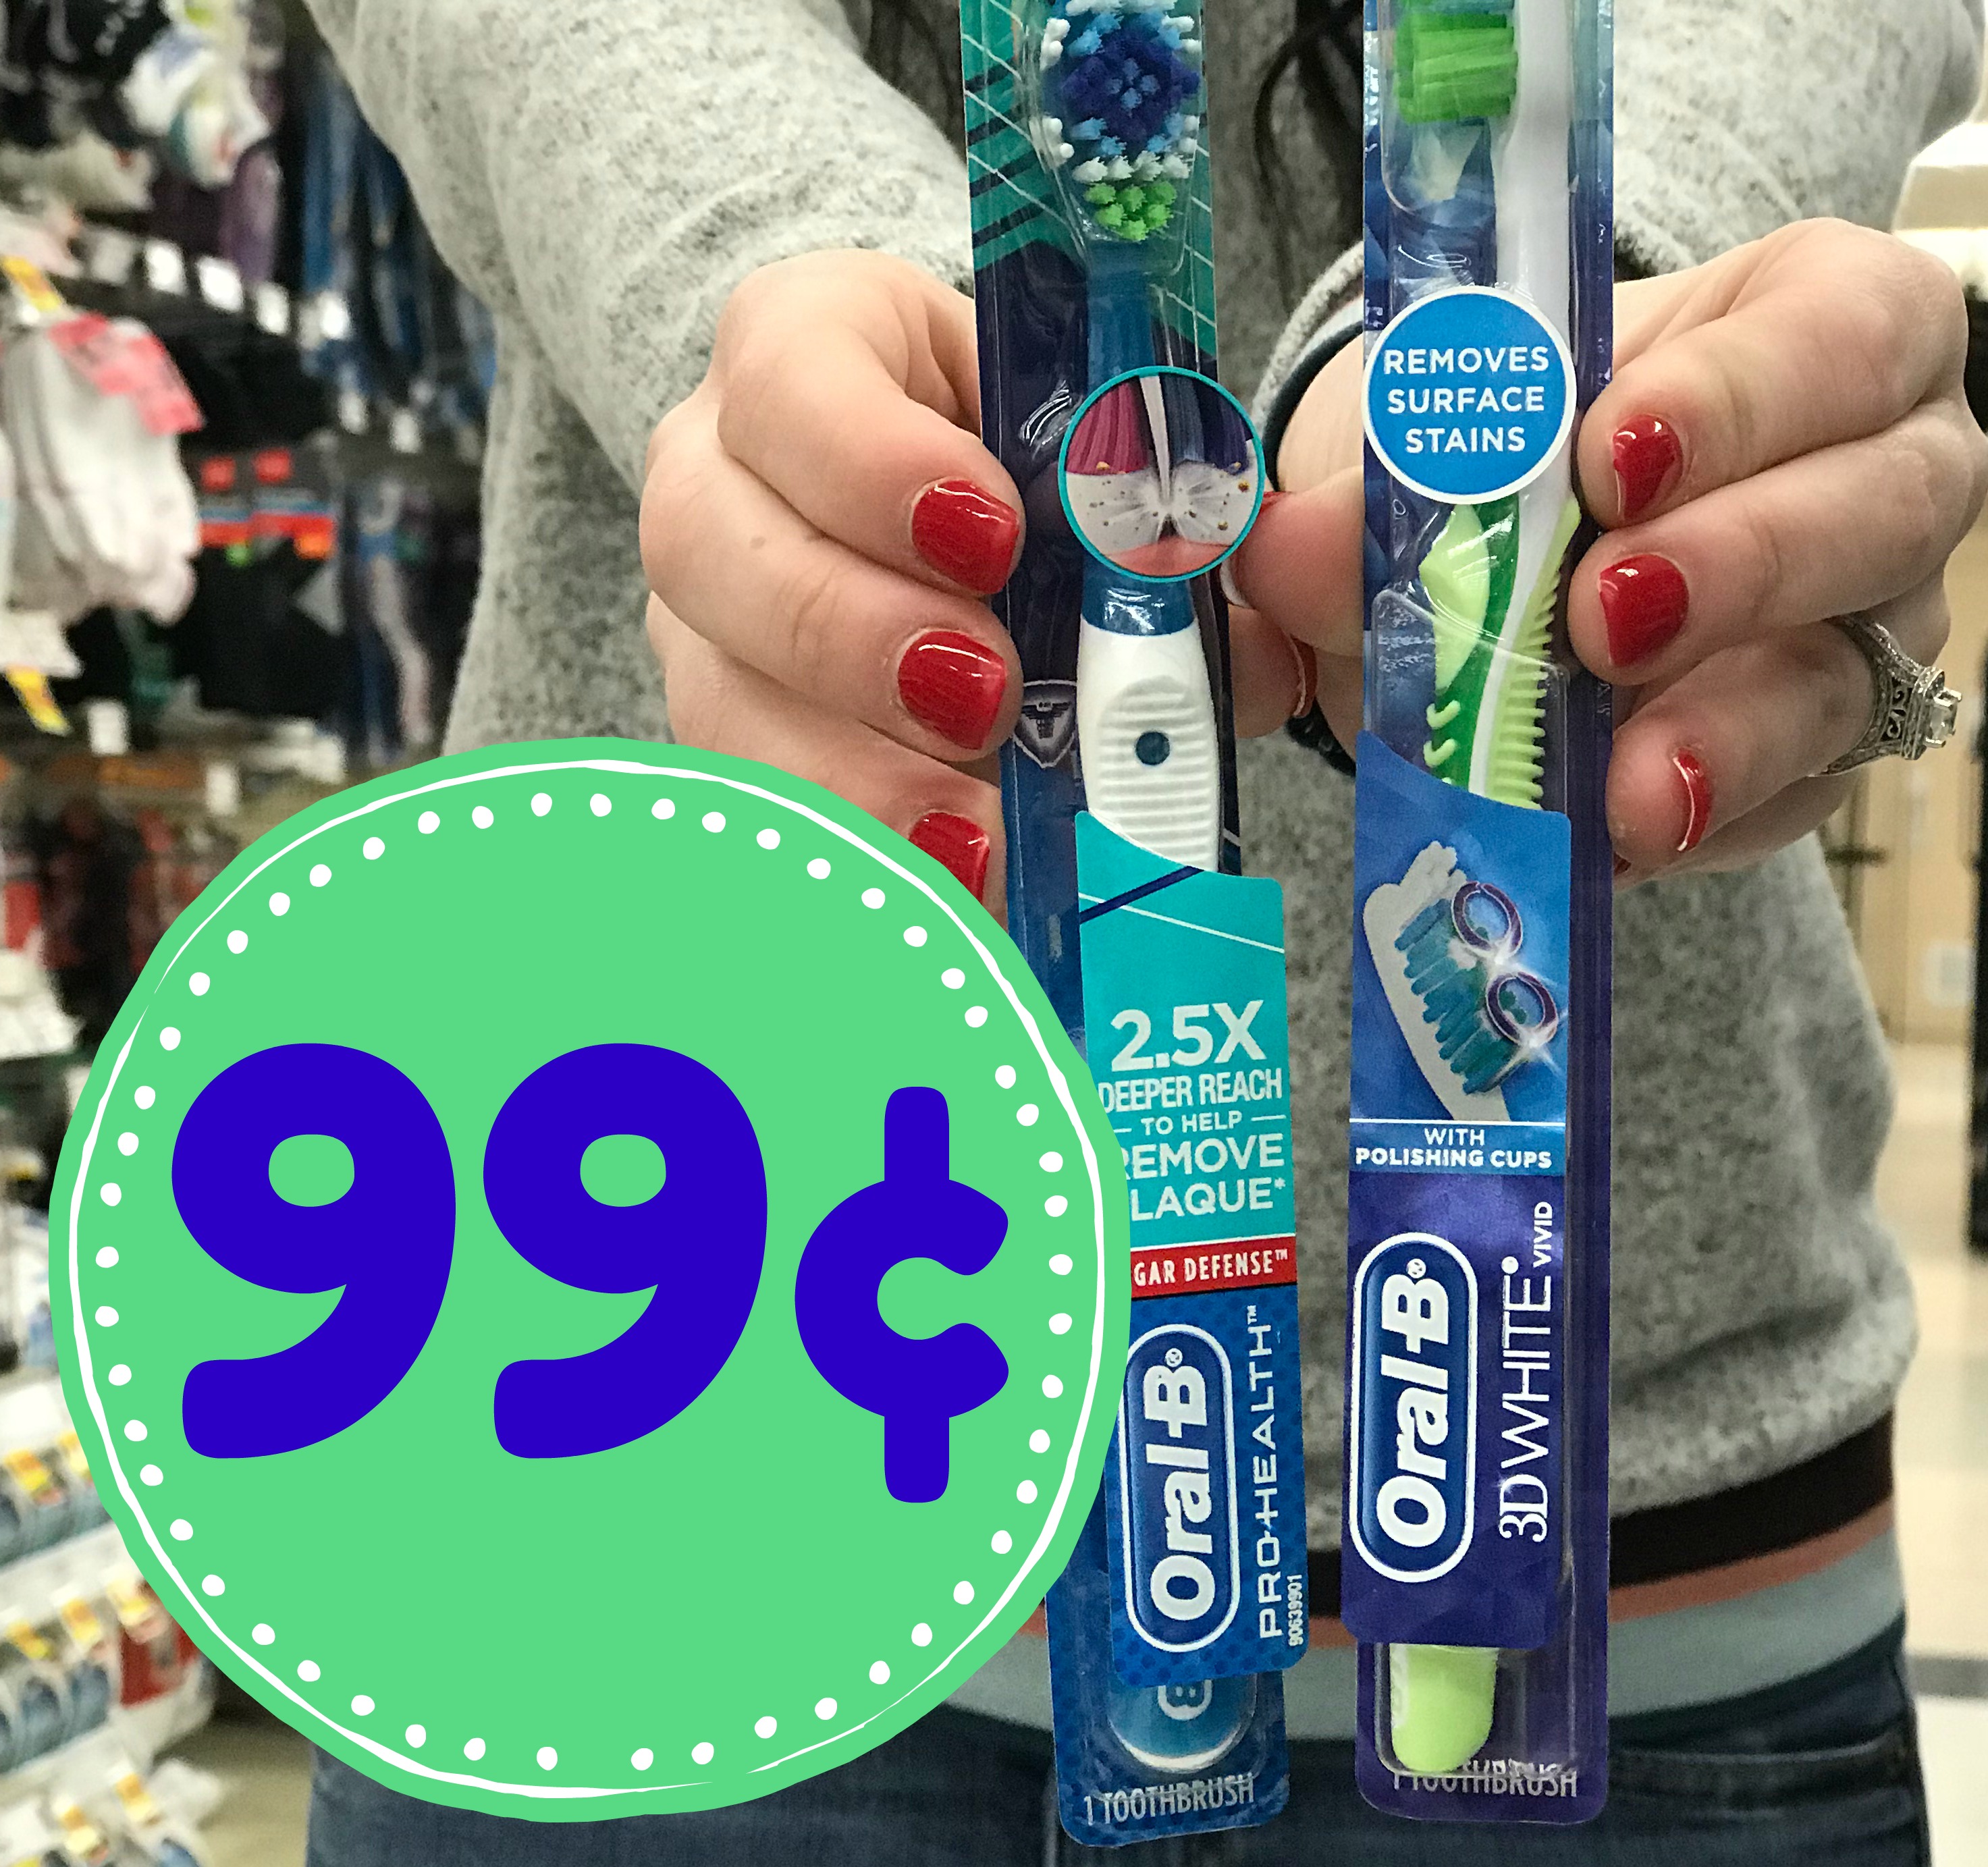 NEW OralB Toothbrush Coupon = items as low as 0.99 at Kroger